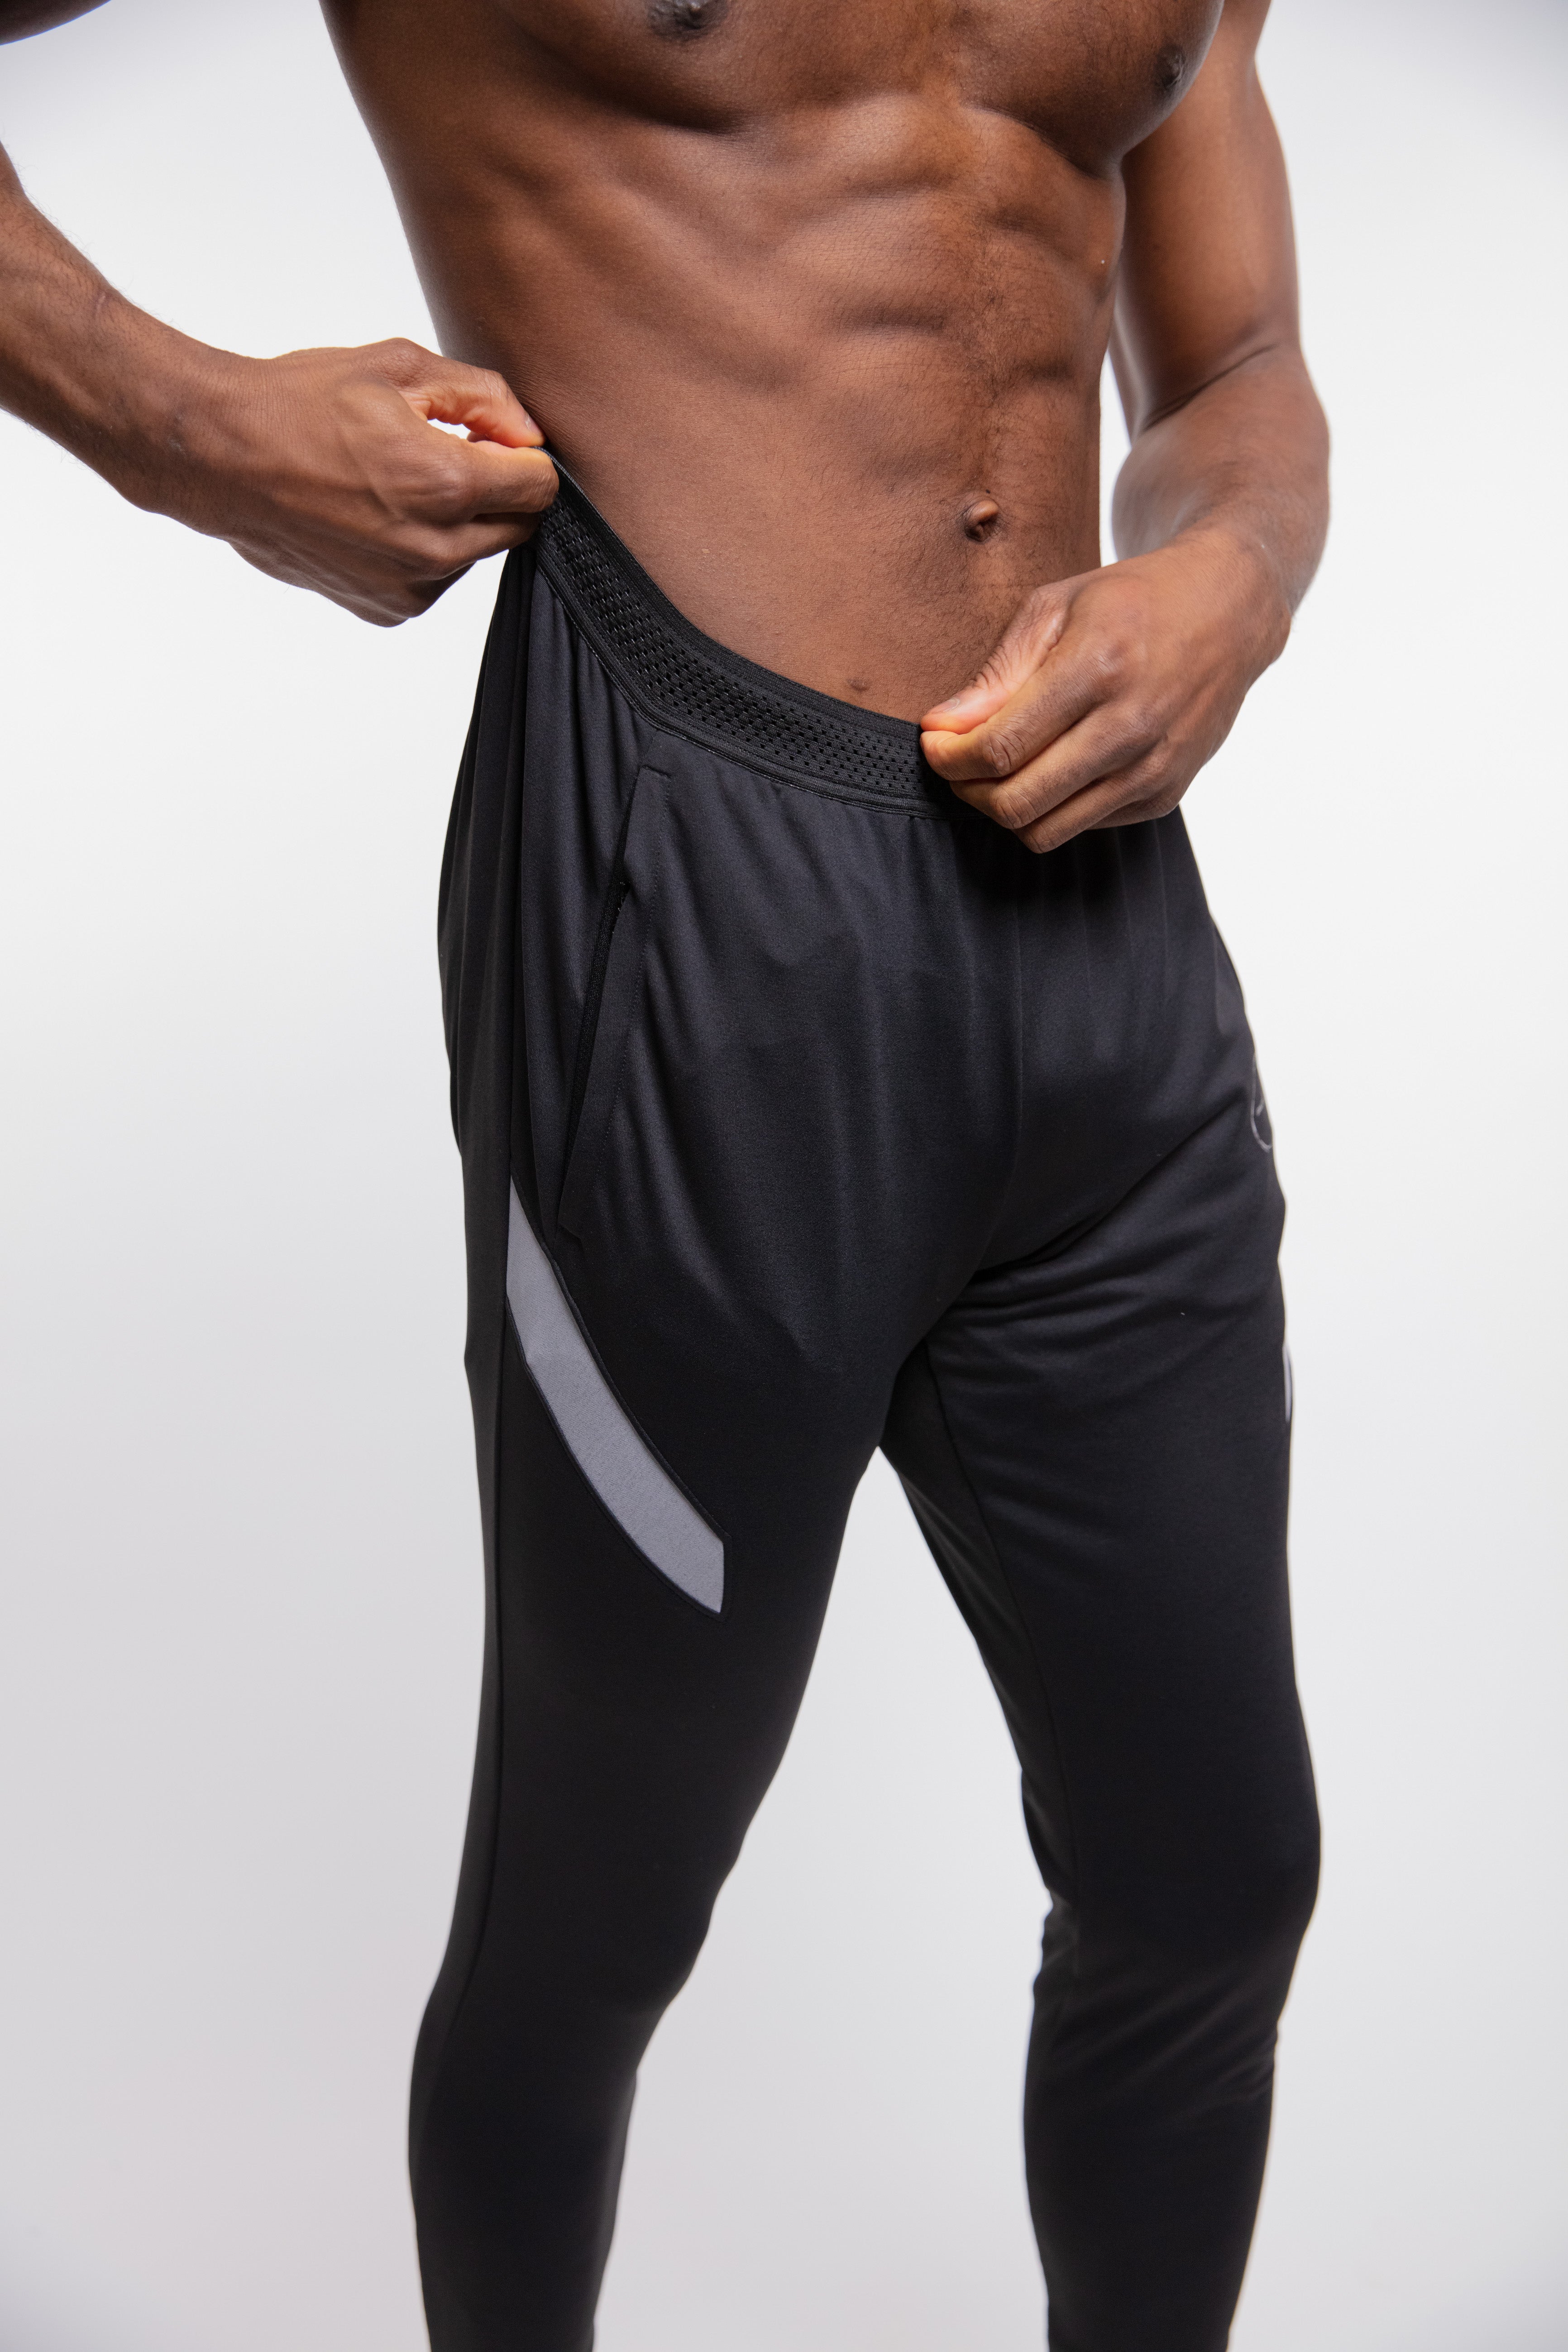 Elite Training Pant In Black & Grey - Gain The Edge Official